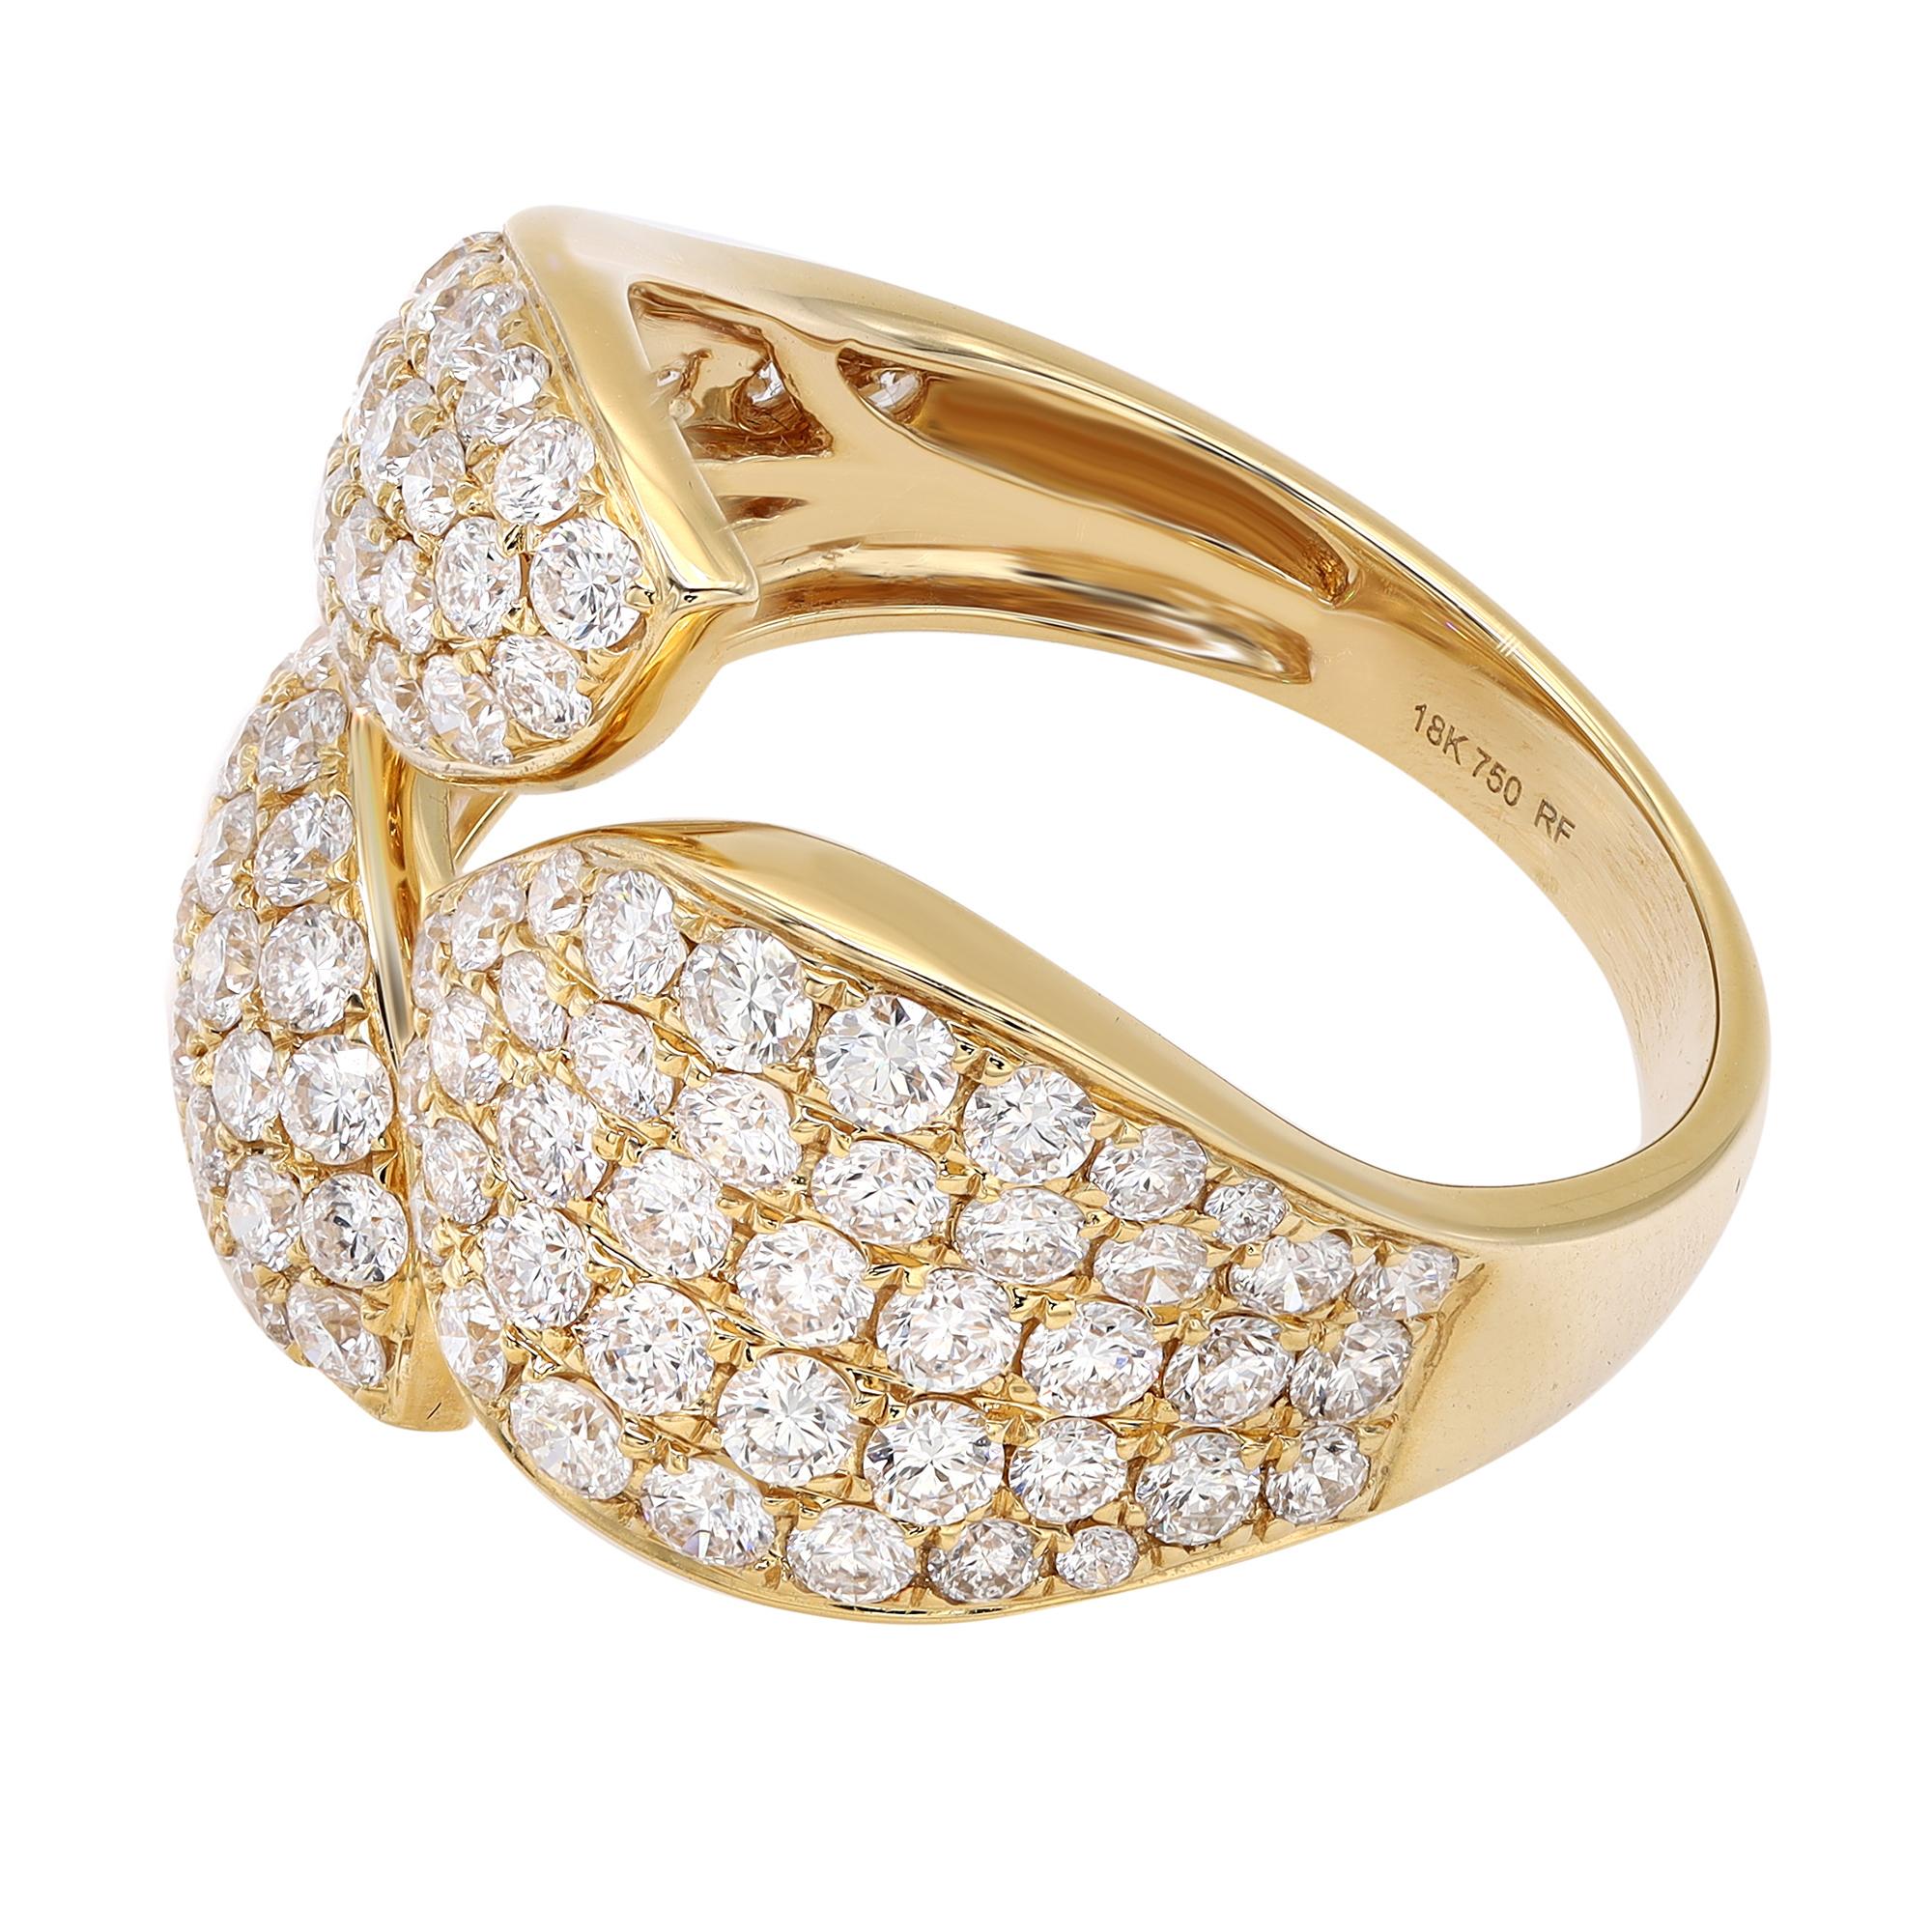 Rachel Koen Pave Set Round Cut Diamond Ring 18K Yellow Gold 2.00Cttw In New Condition For Sale In New York, NY